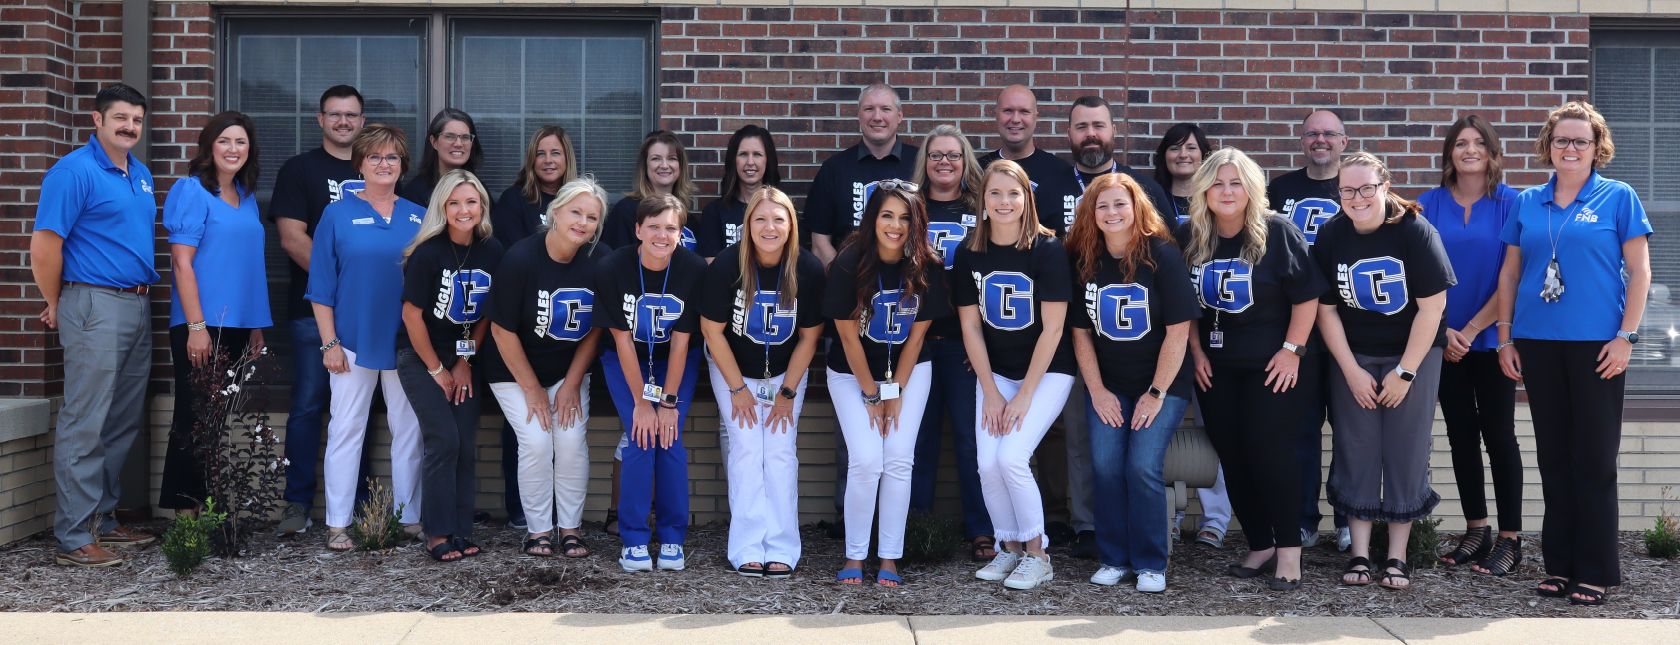 FNB Donates Shirts to Graves County School District